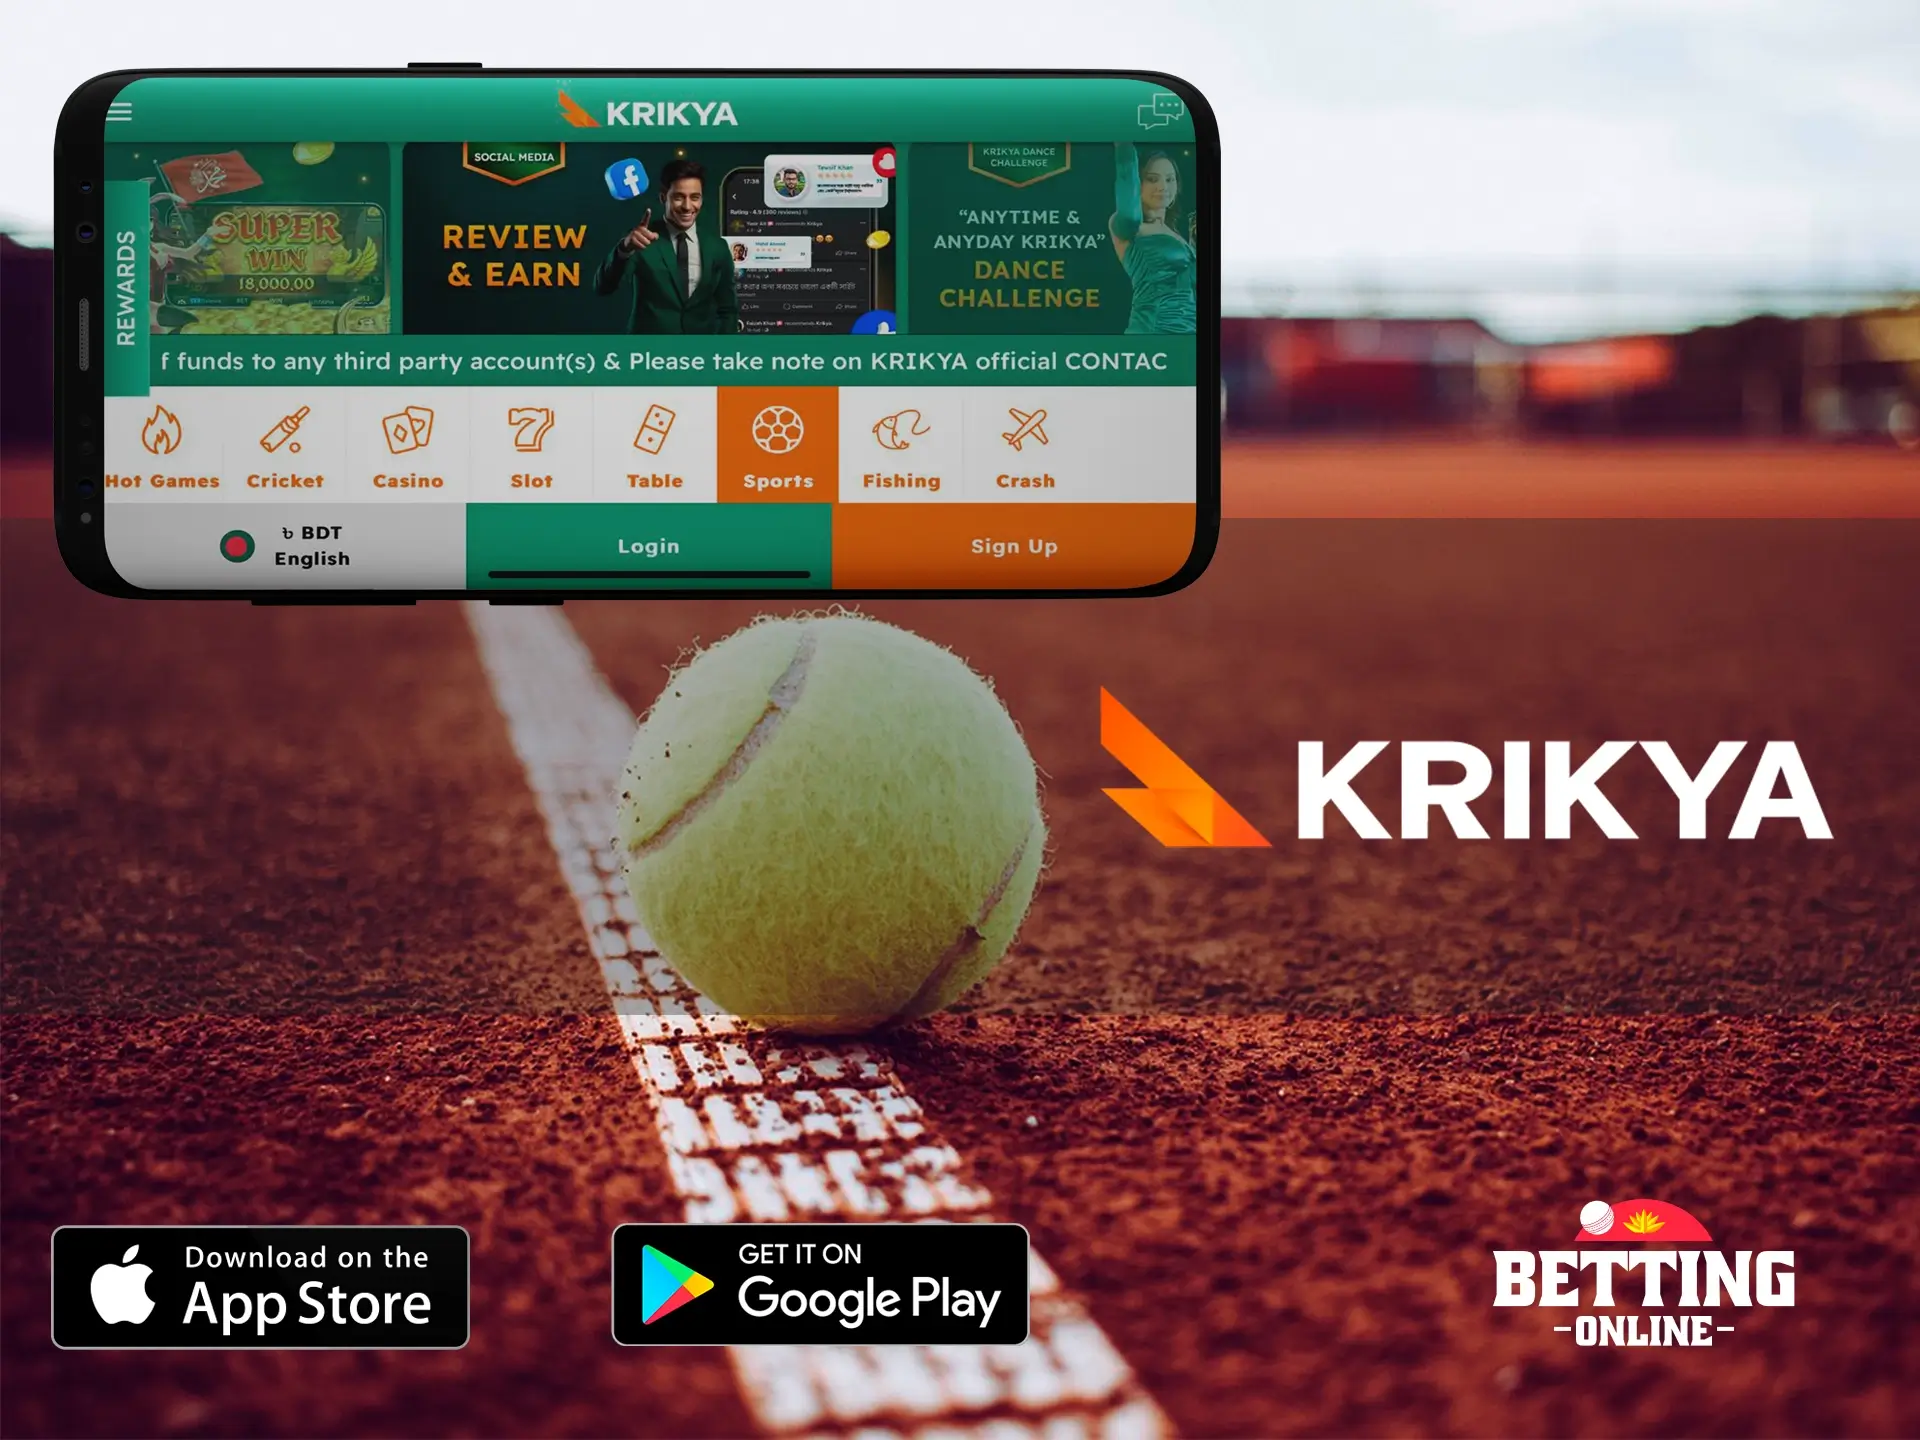 An excellent referral system and bonuses are already waiting for you in the Krikya app.